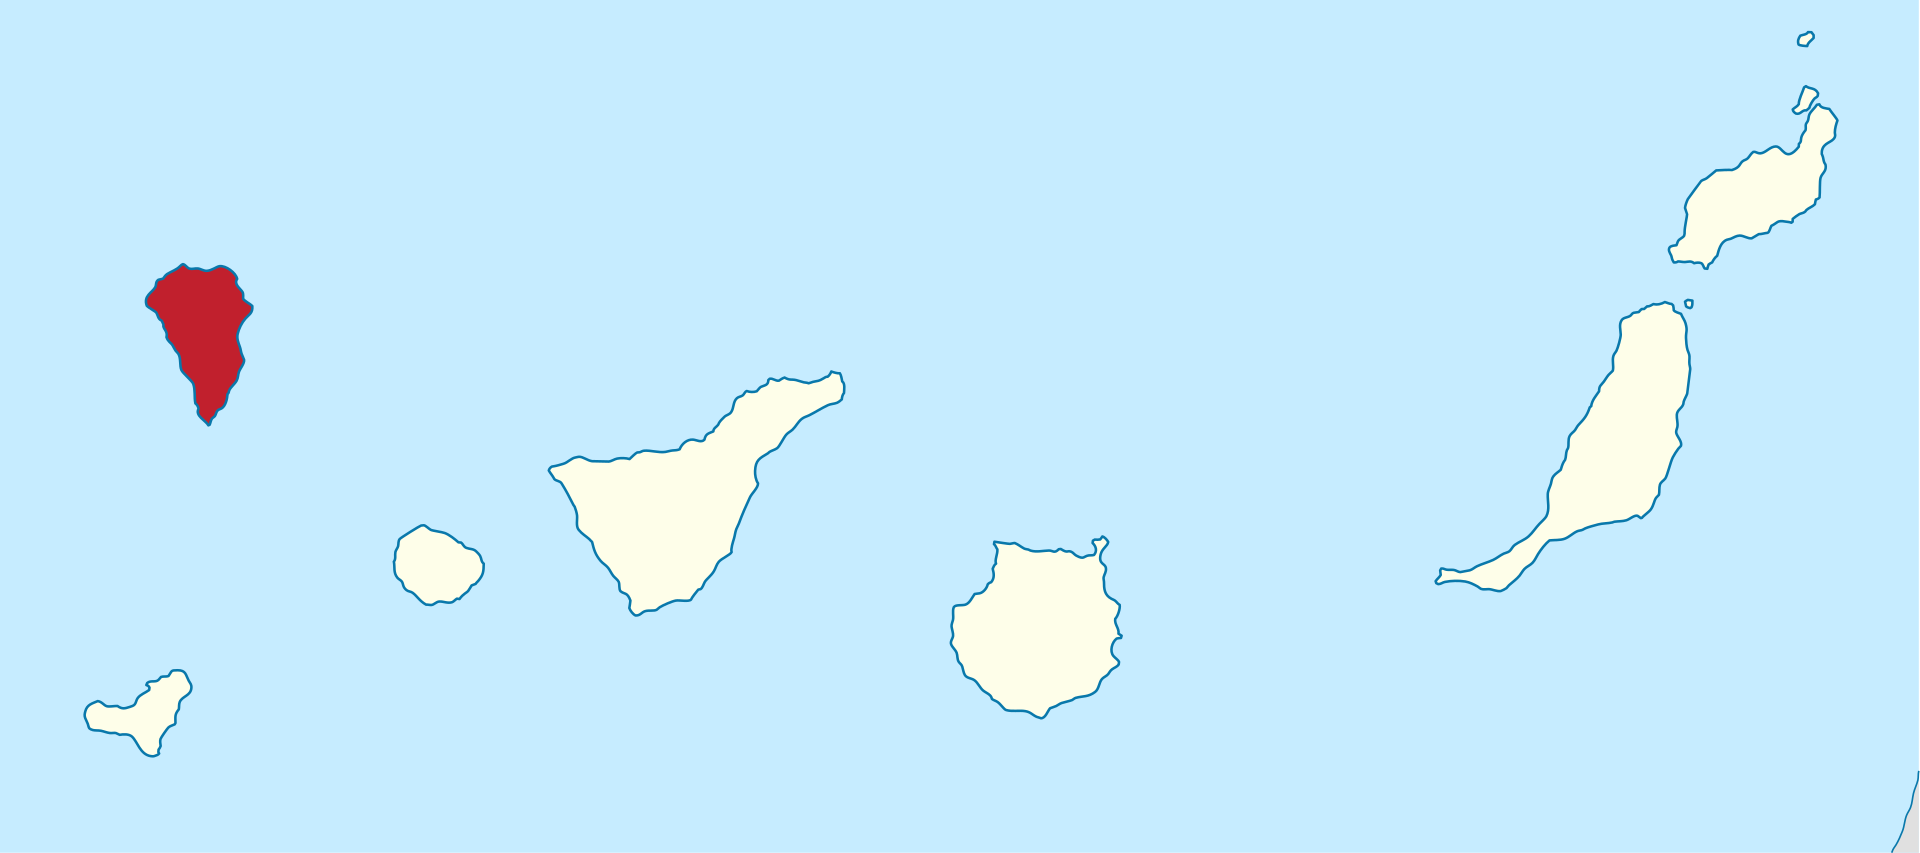 Map of La Palma in the Canary Islands. Image credit NordNordWest